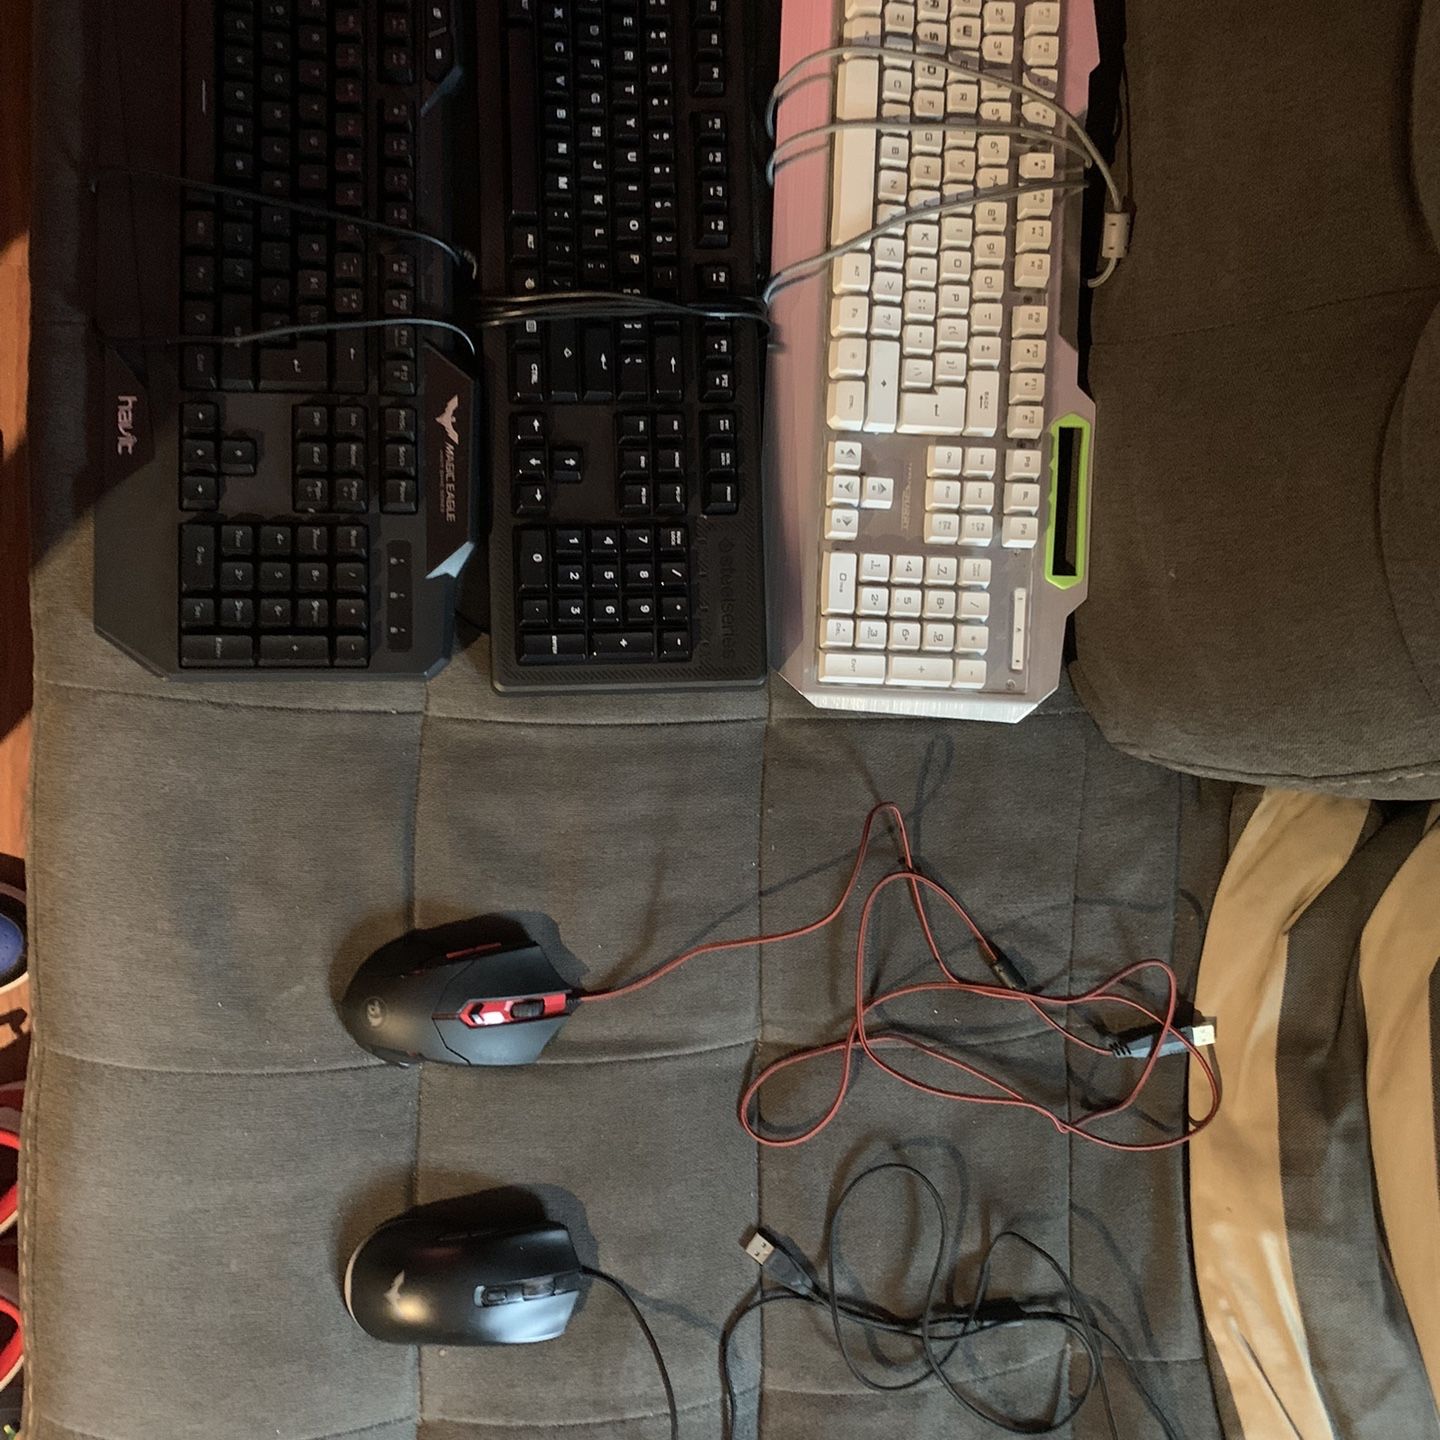 Keyboards And Mouse